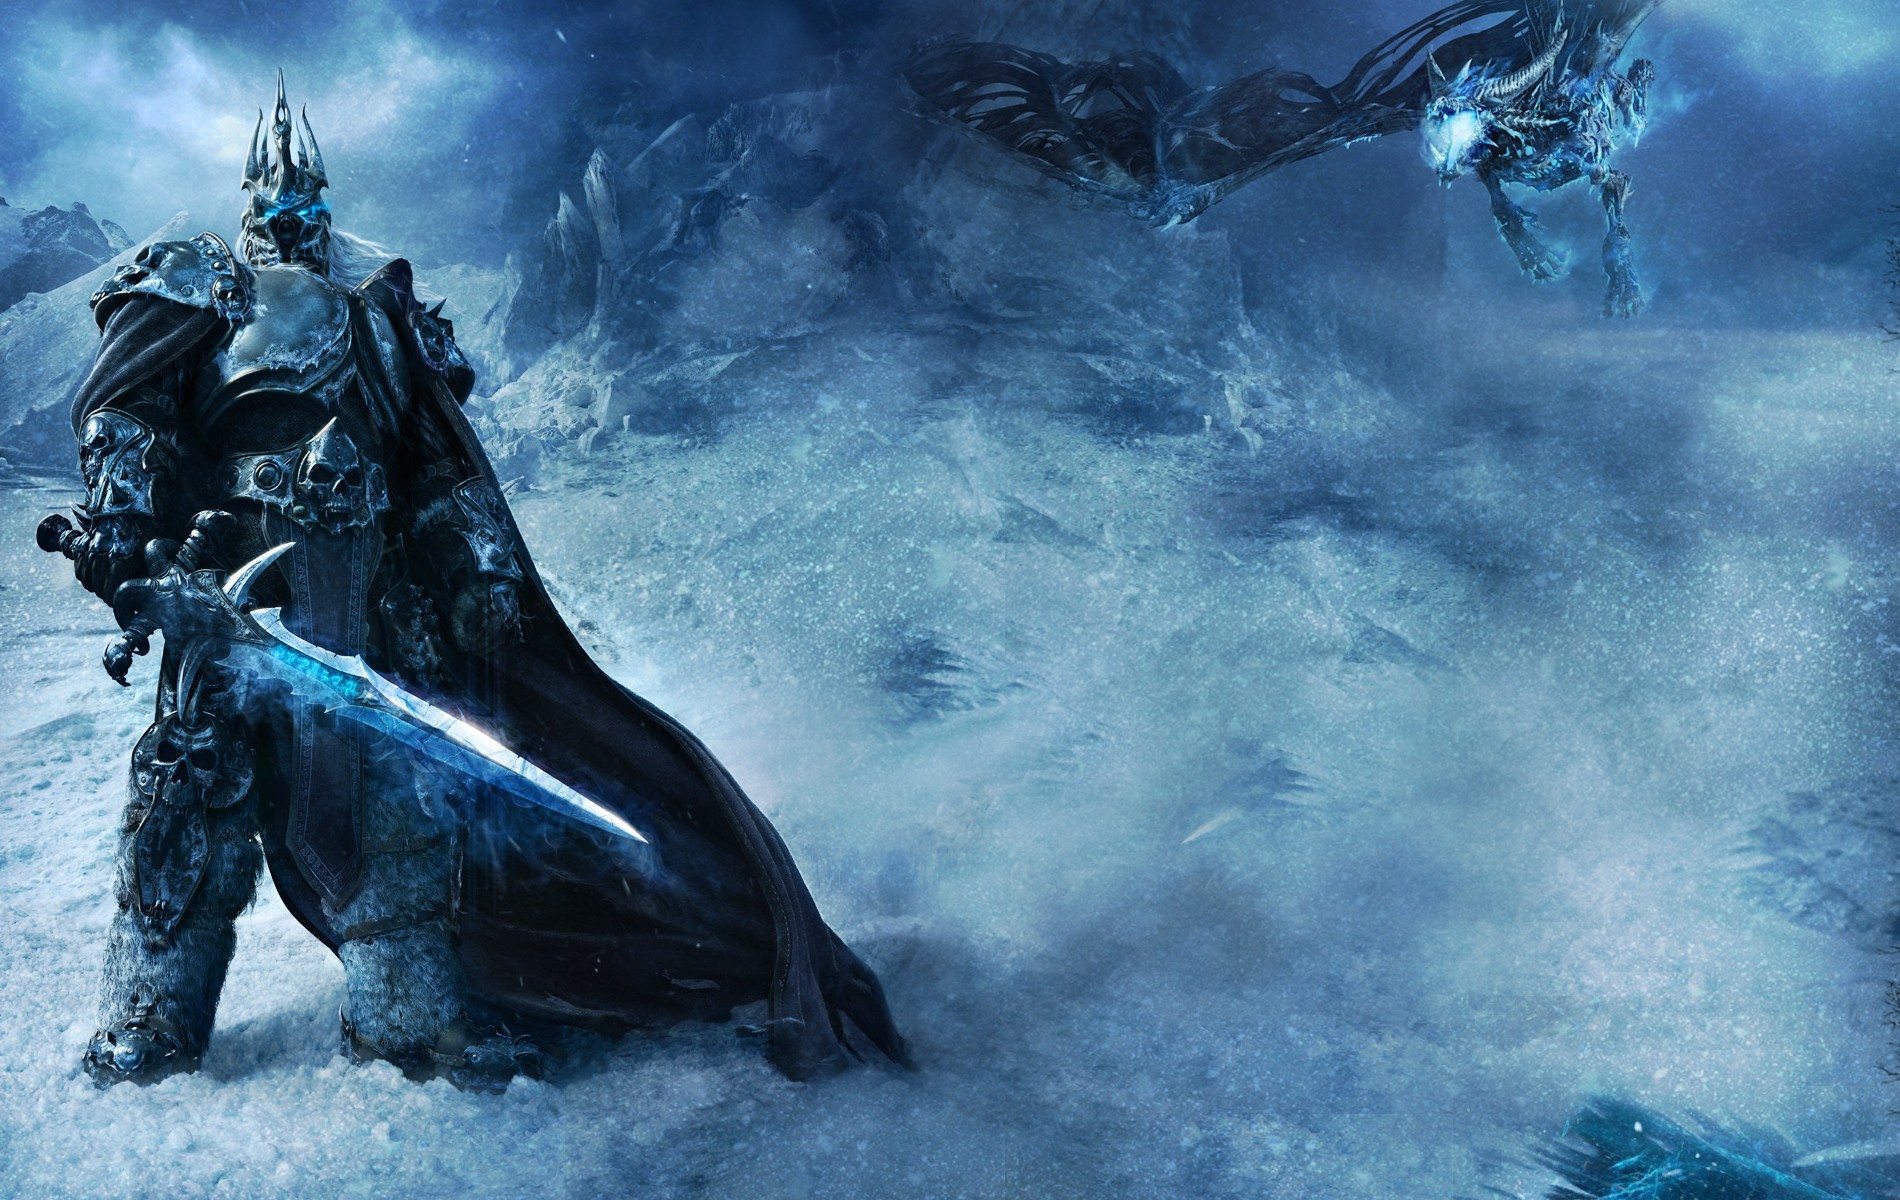 General 1900x1200 World of Warcraft World of Warcraft: Wrath of the Lich King video games cyan blue PC gaming video game art Blizzard Entertainment